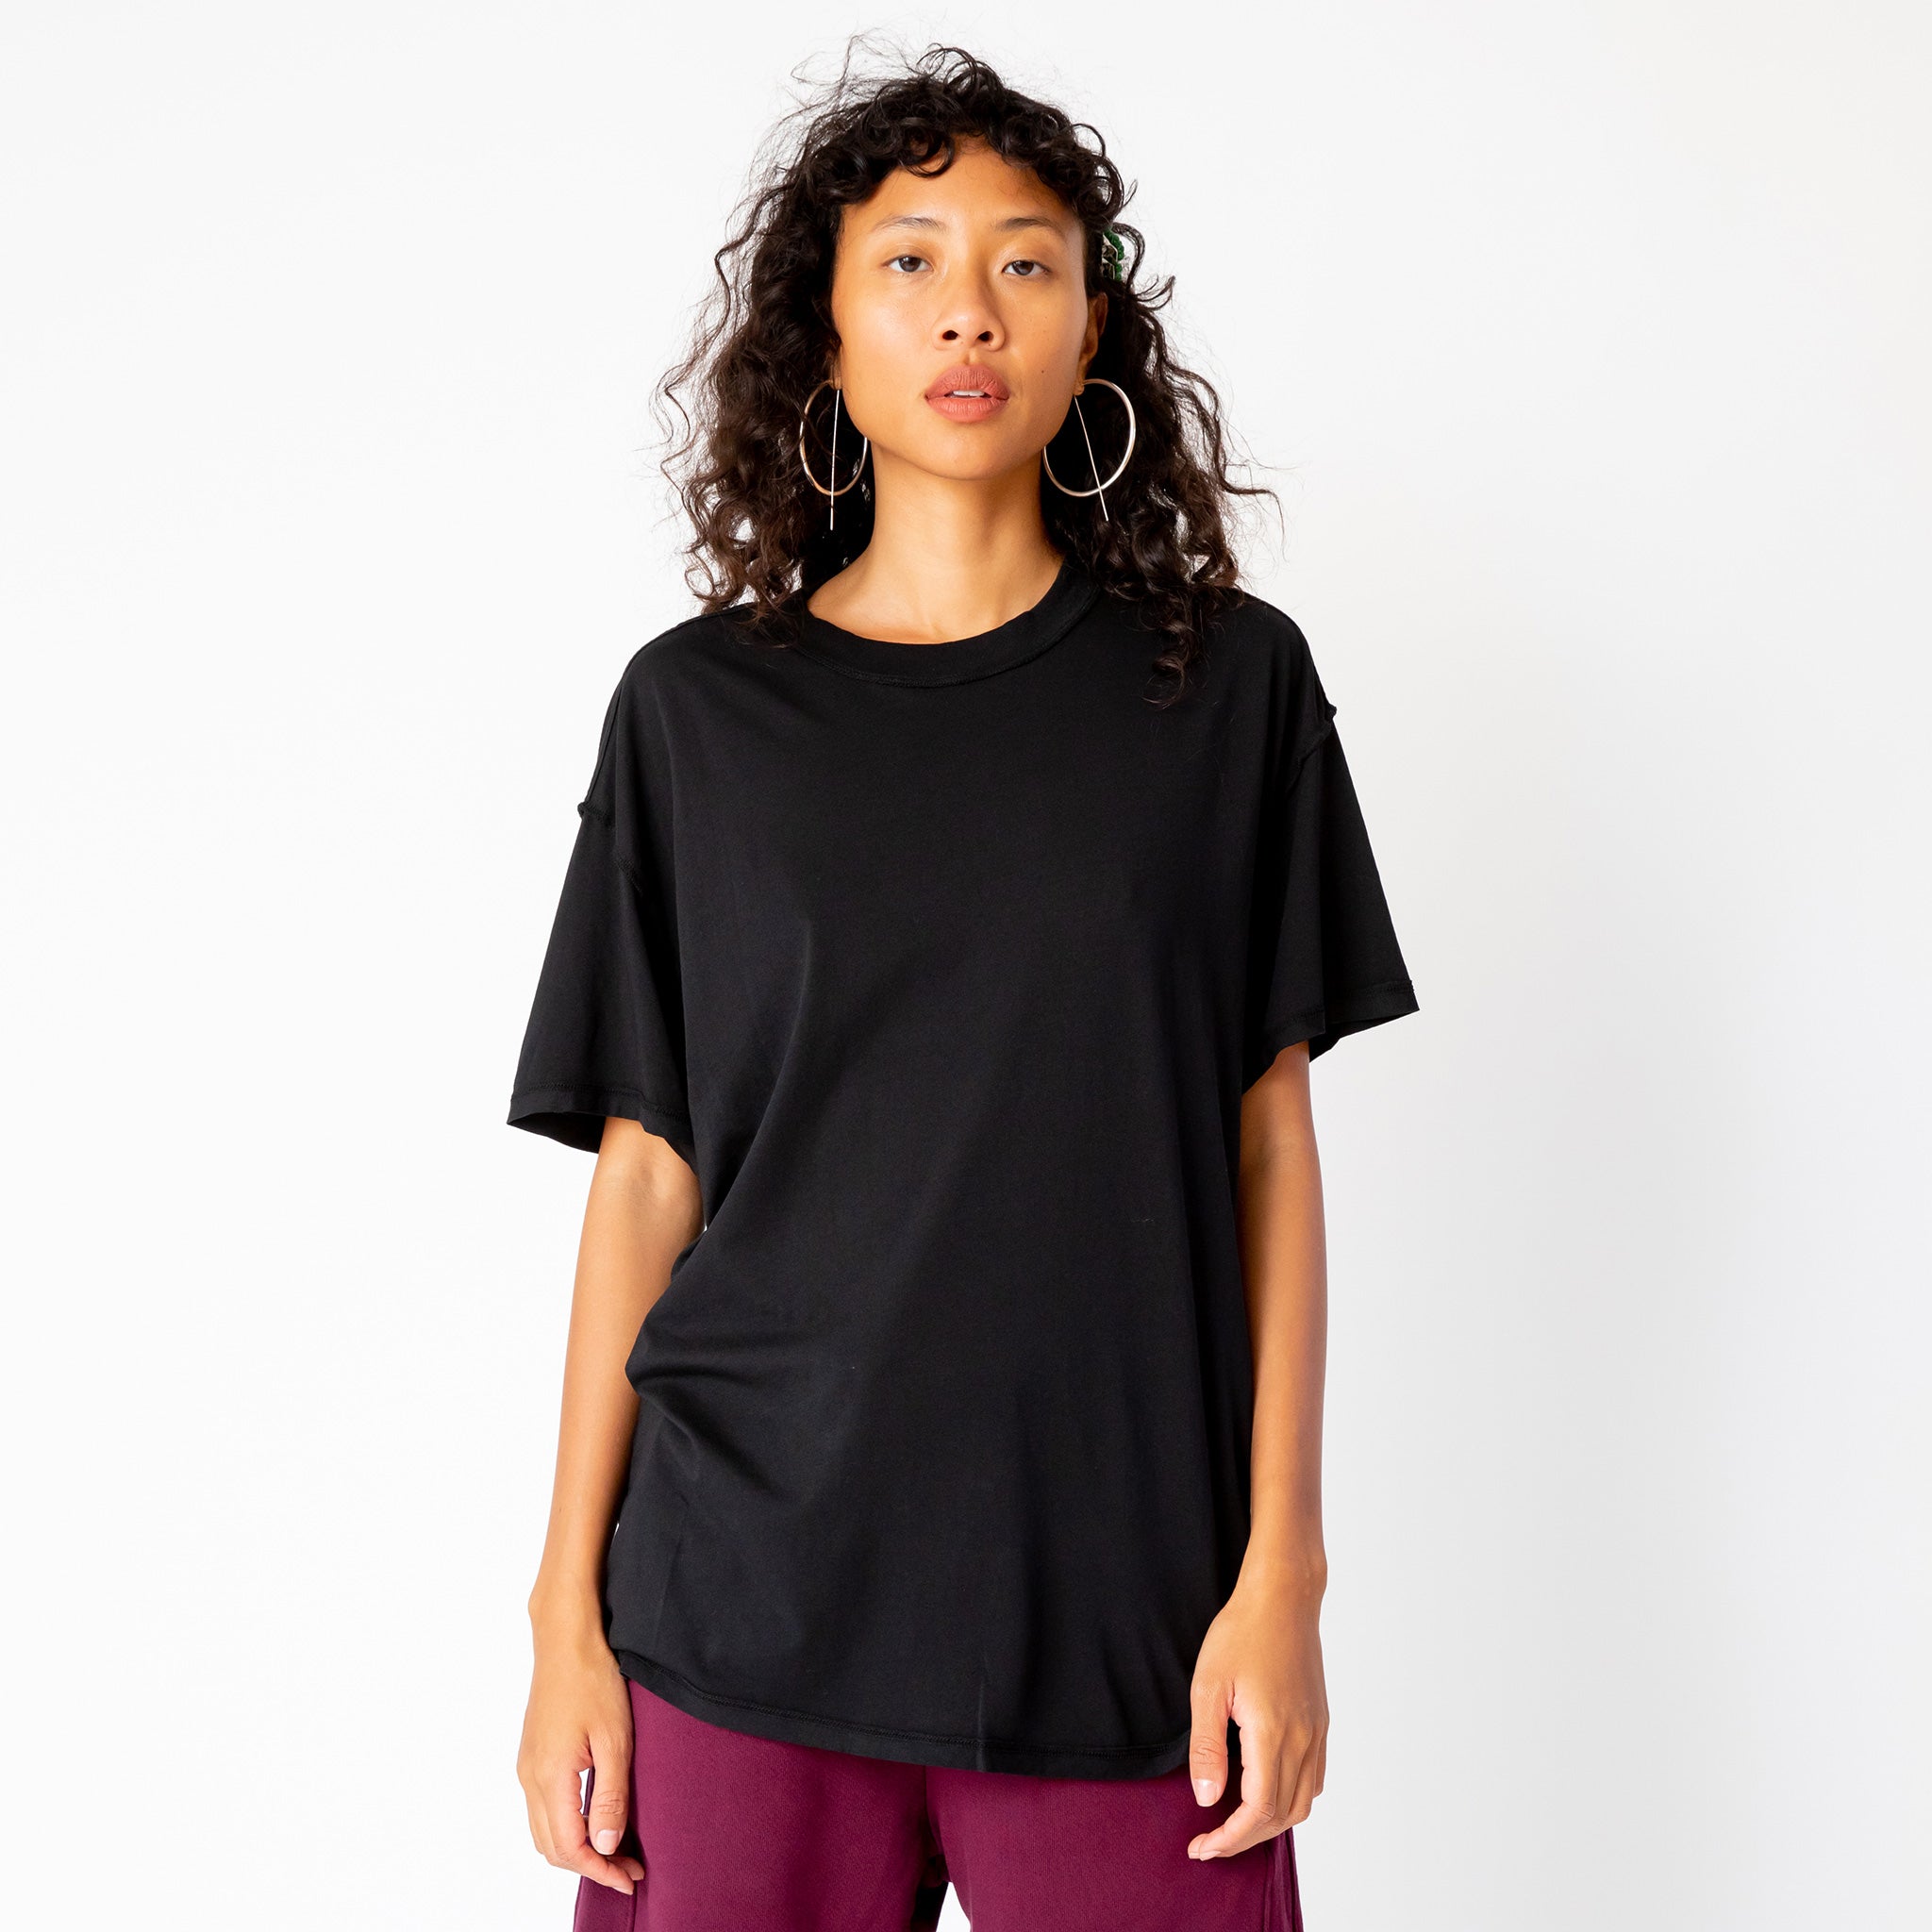 A model wears the Inside Out Tee in jet black, paired with merlot colored sweat shorts - front view.